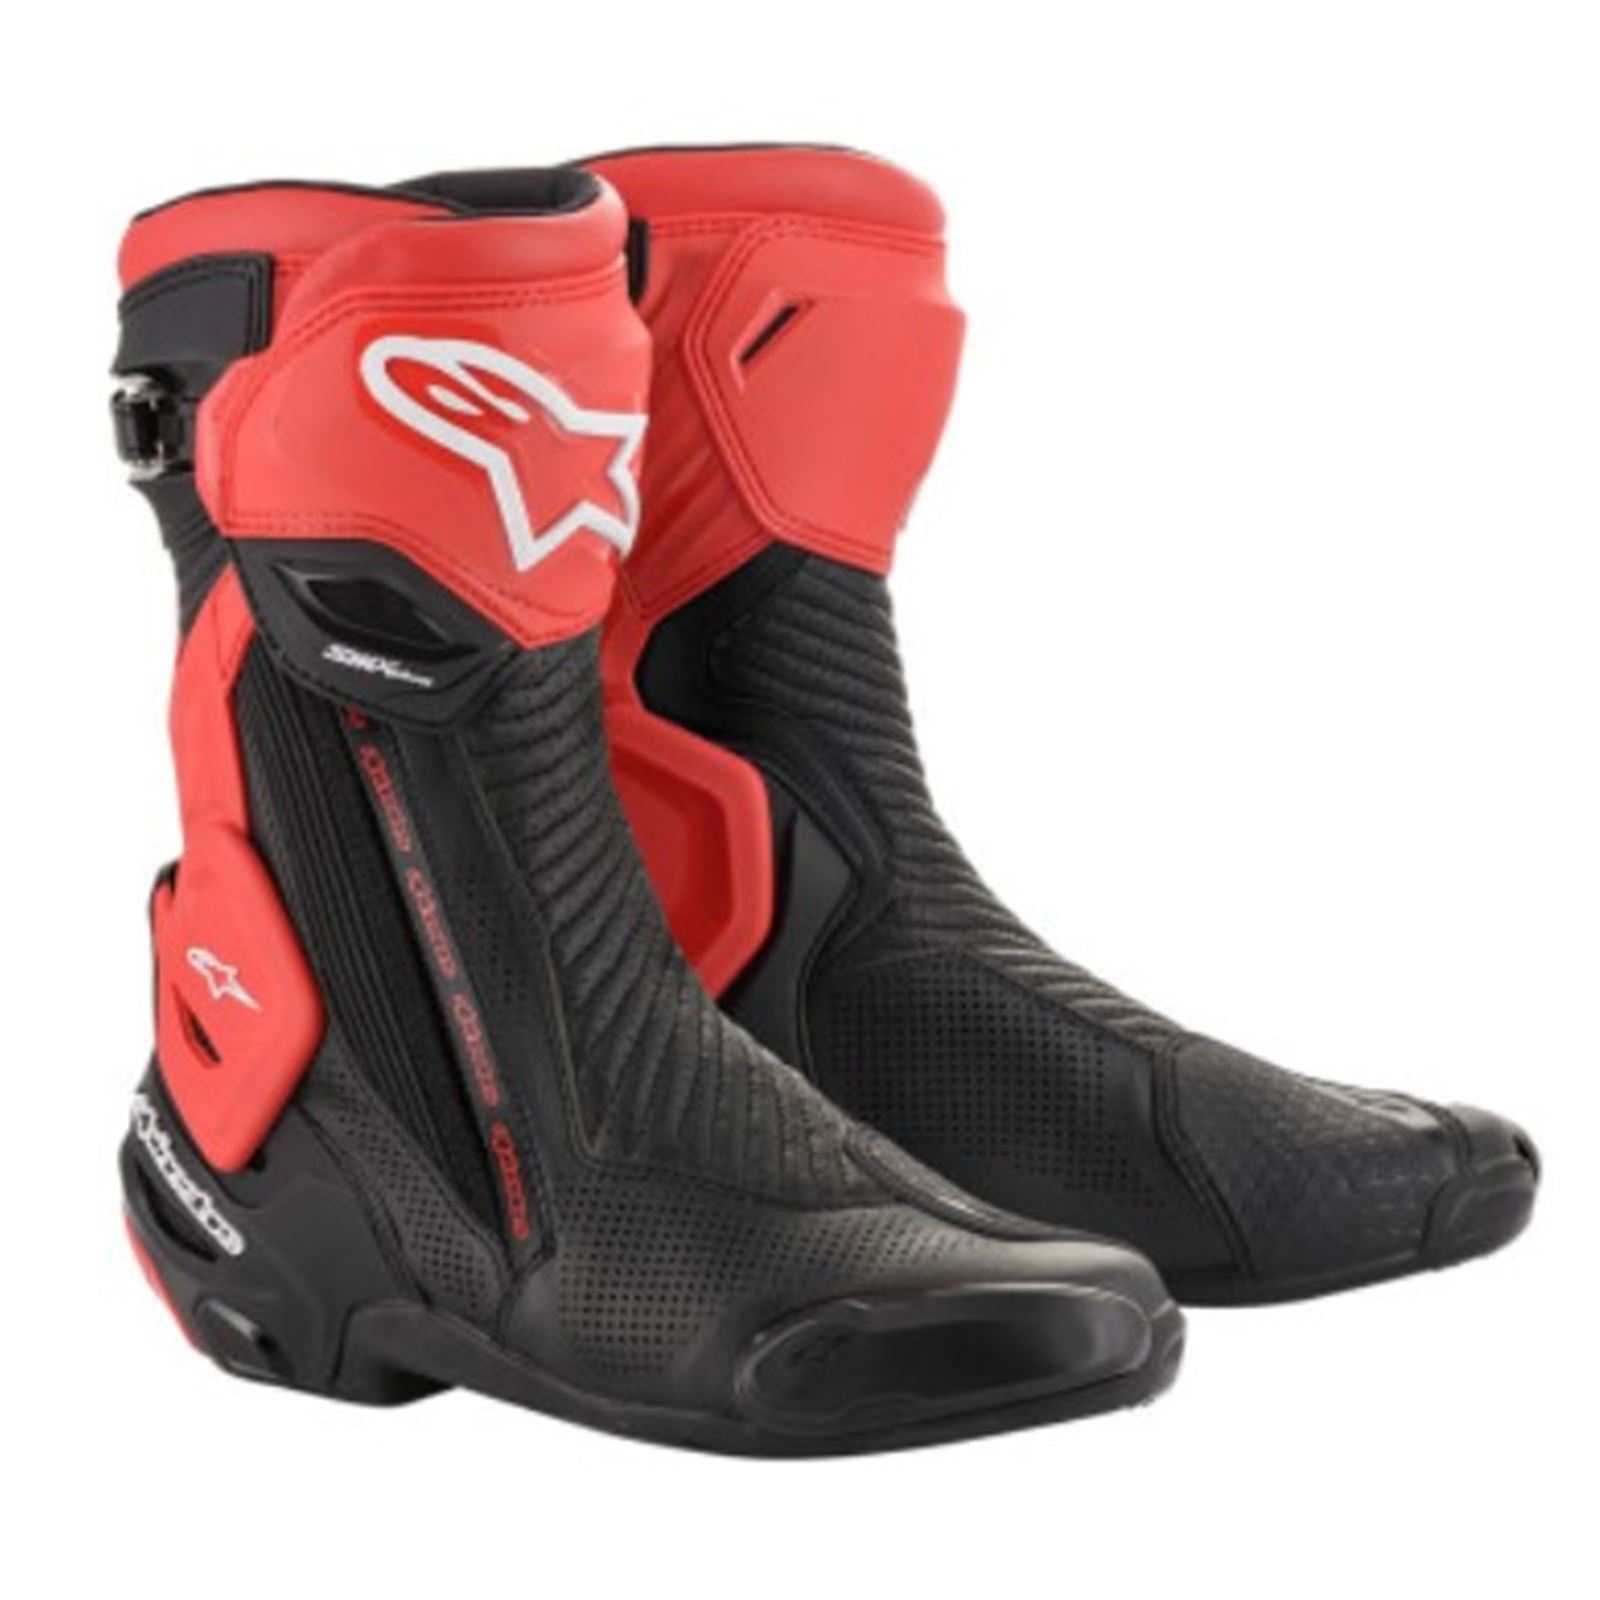 Alpinestars SMX+ Vented Boots - Black/Red - Size 8